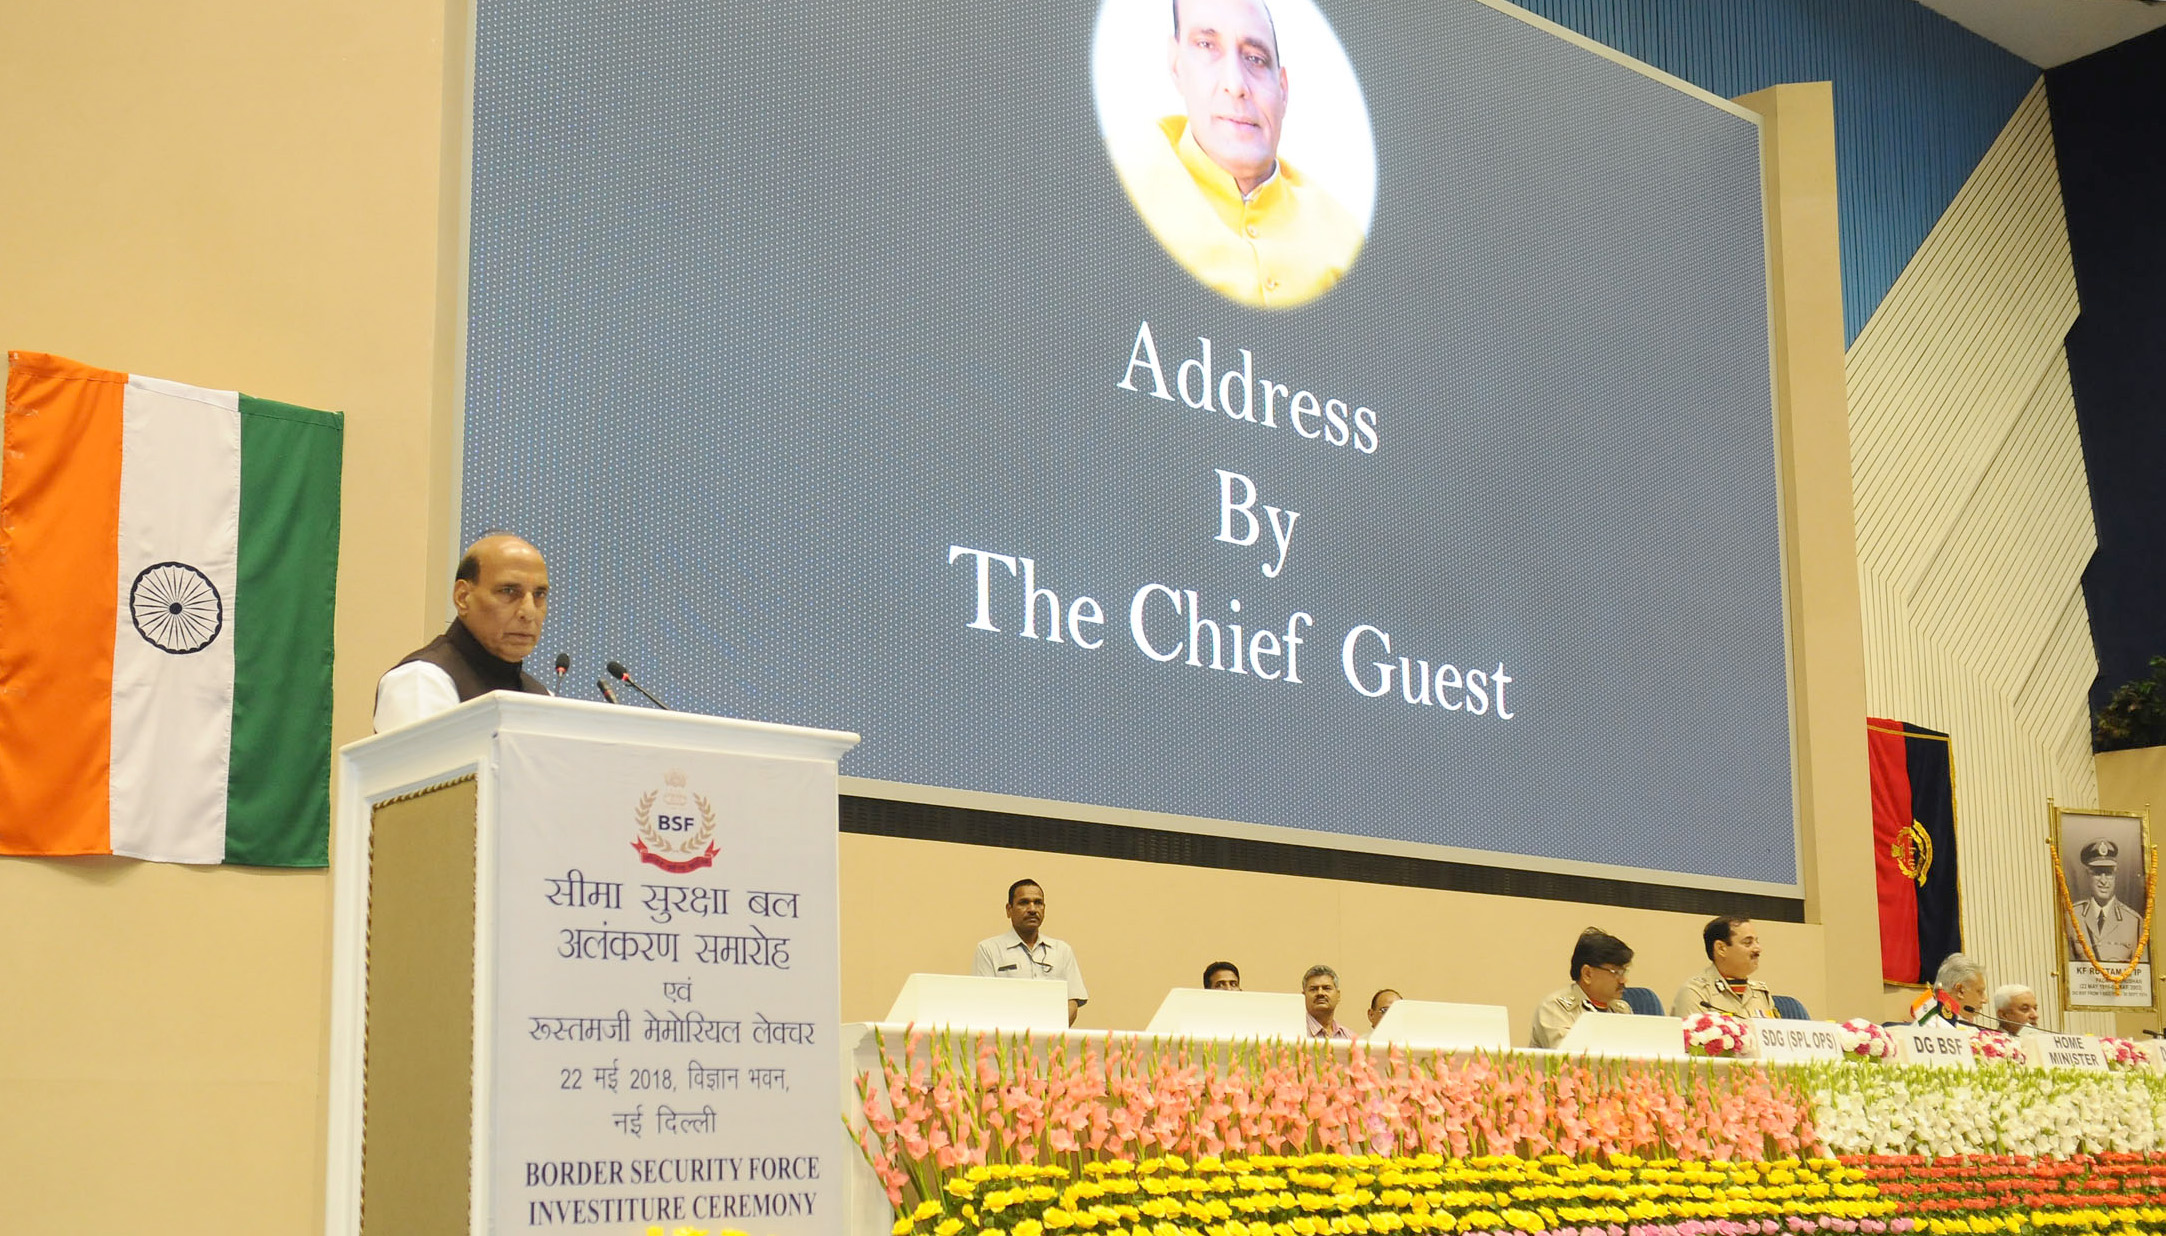 The Union Home Minister, Shri Rajnath Singh addressing at the Investiture Ceremony of Border Security Force (BSF), in New Delhi on May 22, 2018.